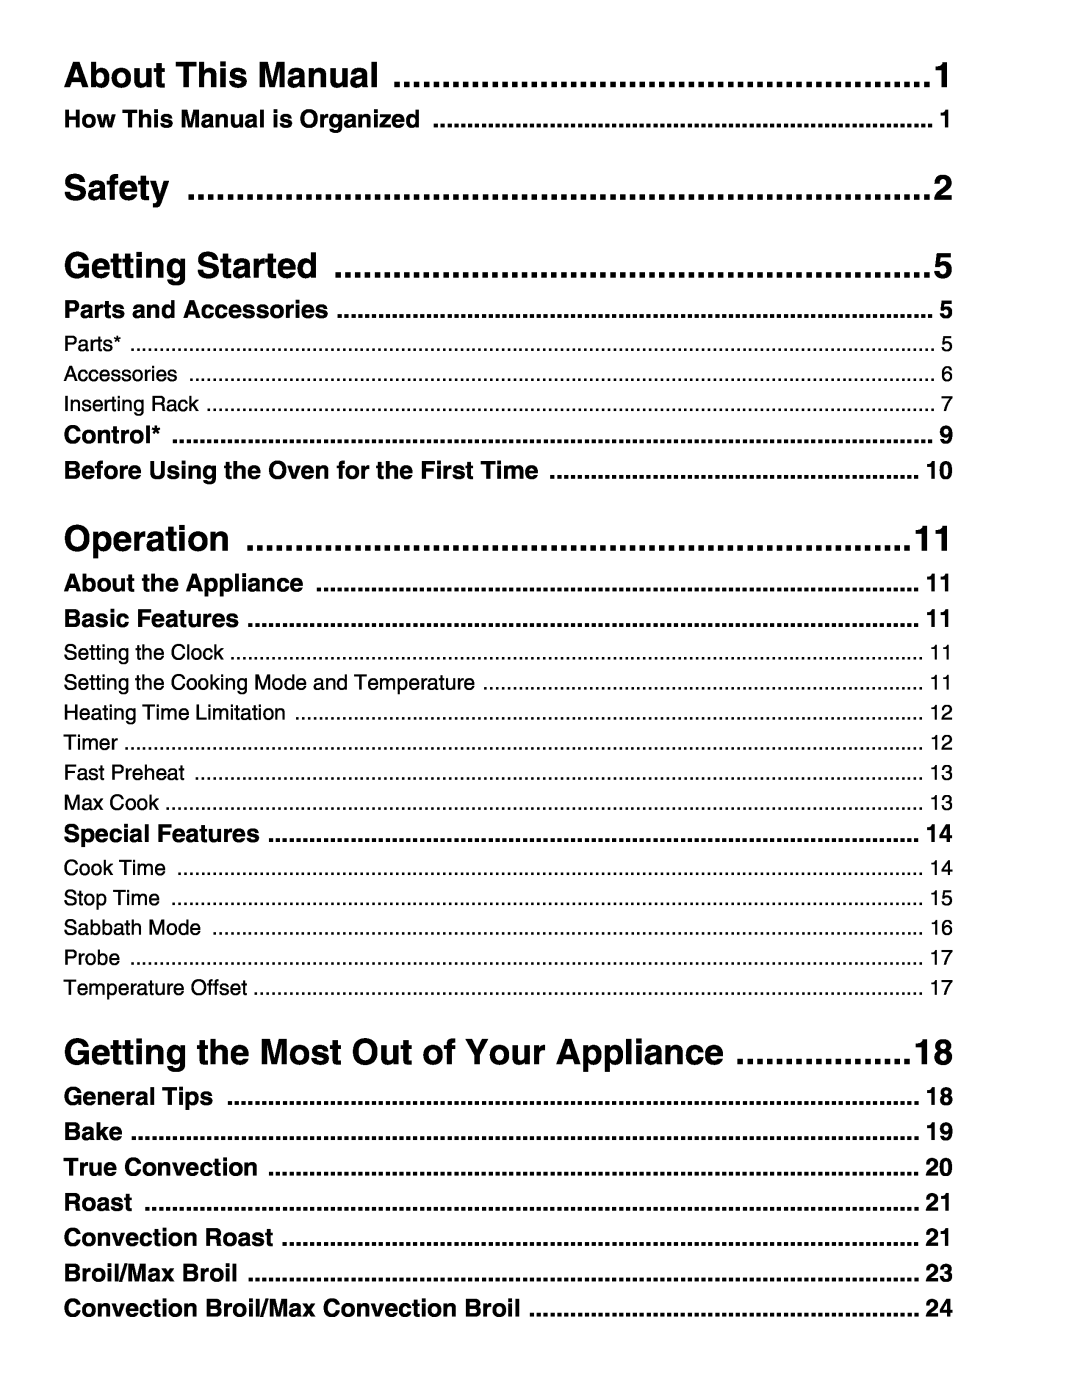 Thermador POD302 manual About This Manual, Safety, Getting Started, Operation, Getting the Most Out of Your Appliance 